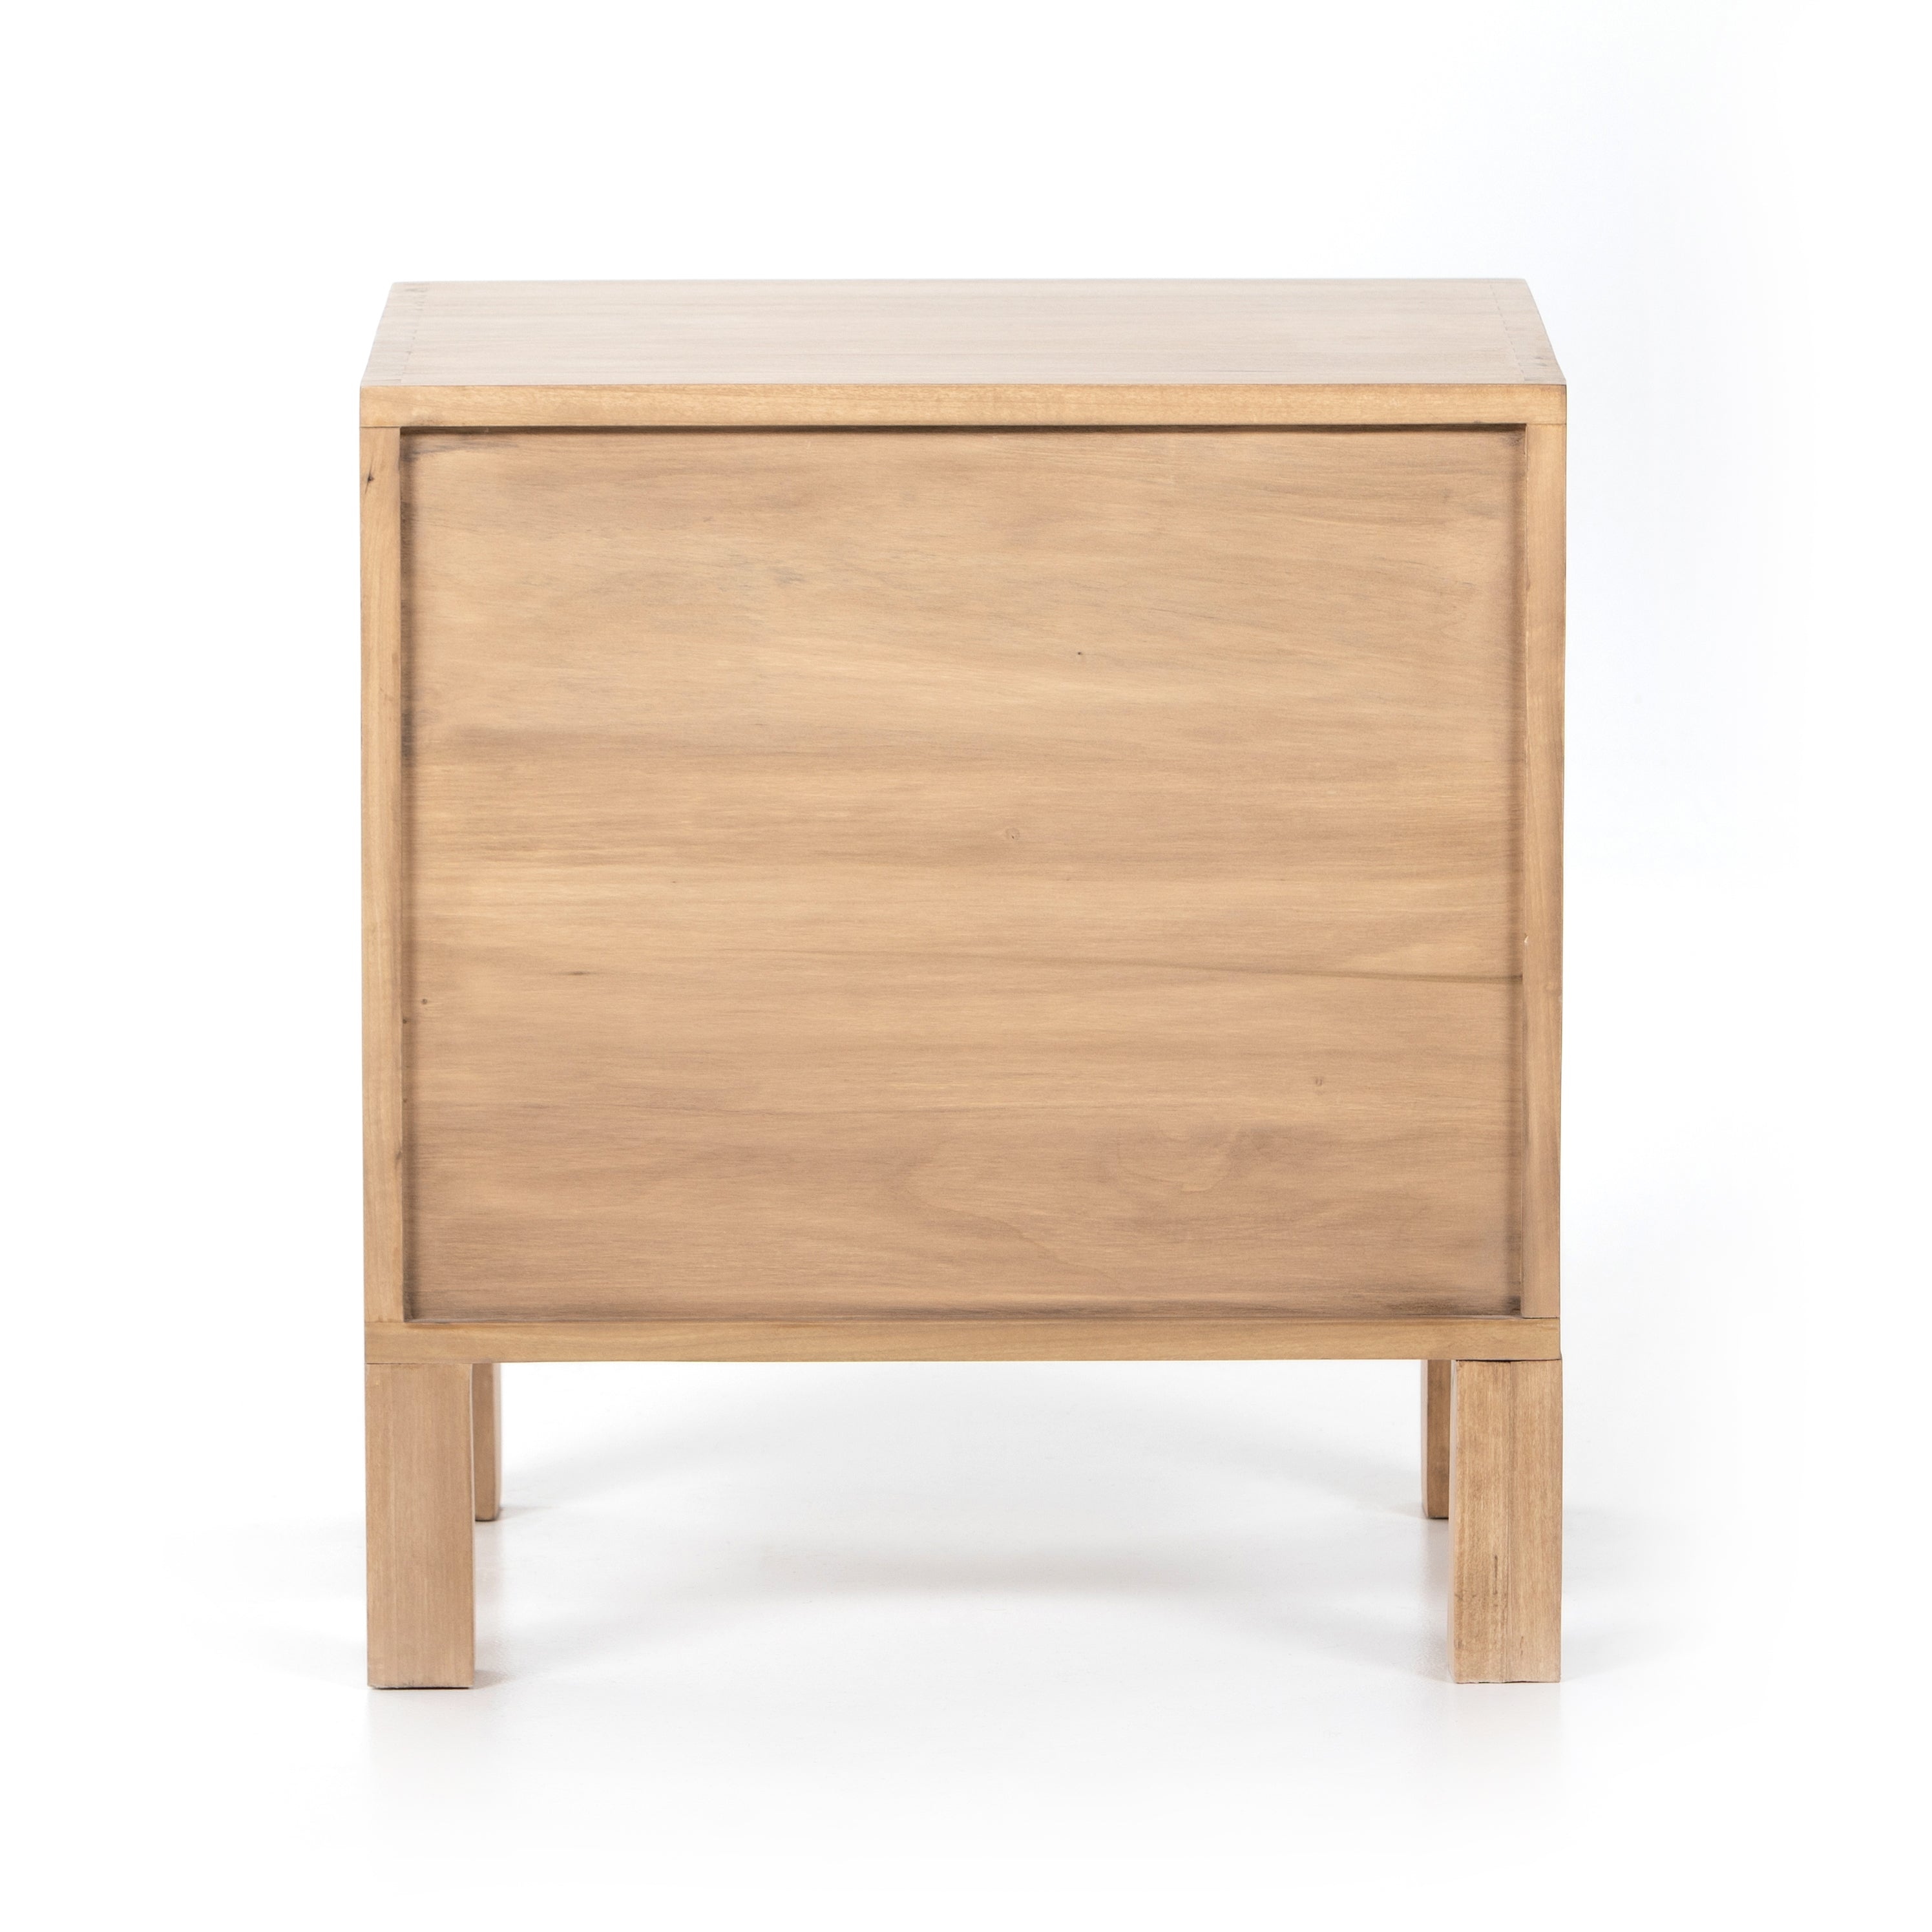 This Isador Nightstand - Dry Wash Poplar is clean, bright and dreamy. Solid dry-washed poplar forms a cubed nightstand, with dovetail joinery plus iron and leather hardware for a fresh look to any bedroom.   Overall Dimensions: 23.00"w x 18.00"d x 25.00"h